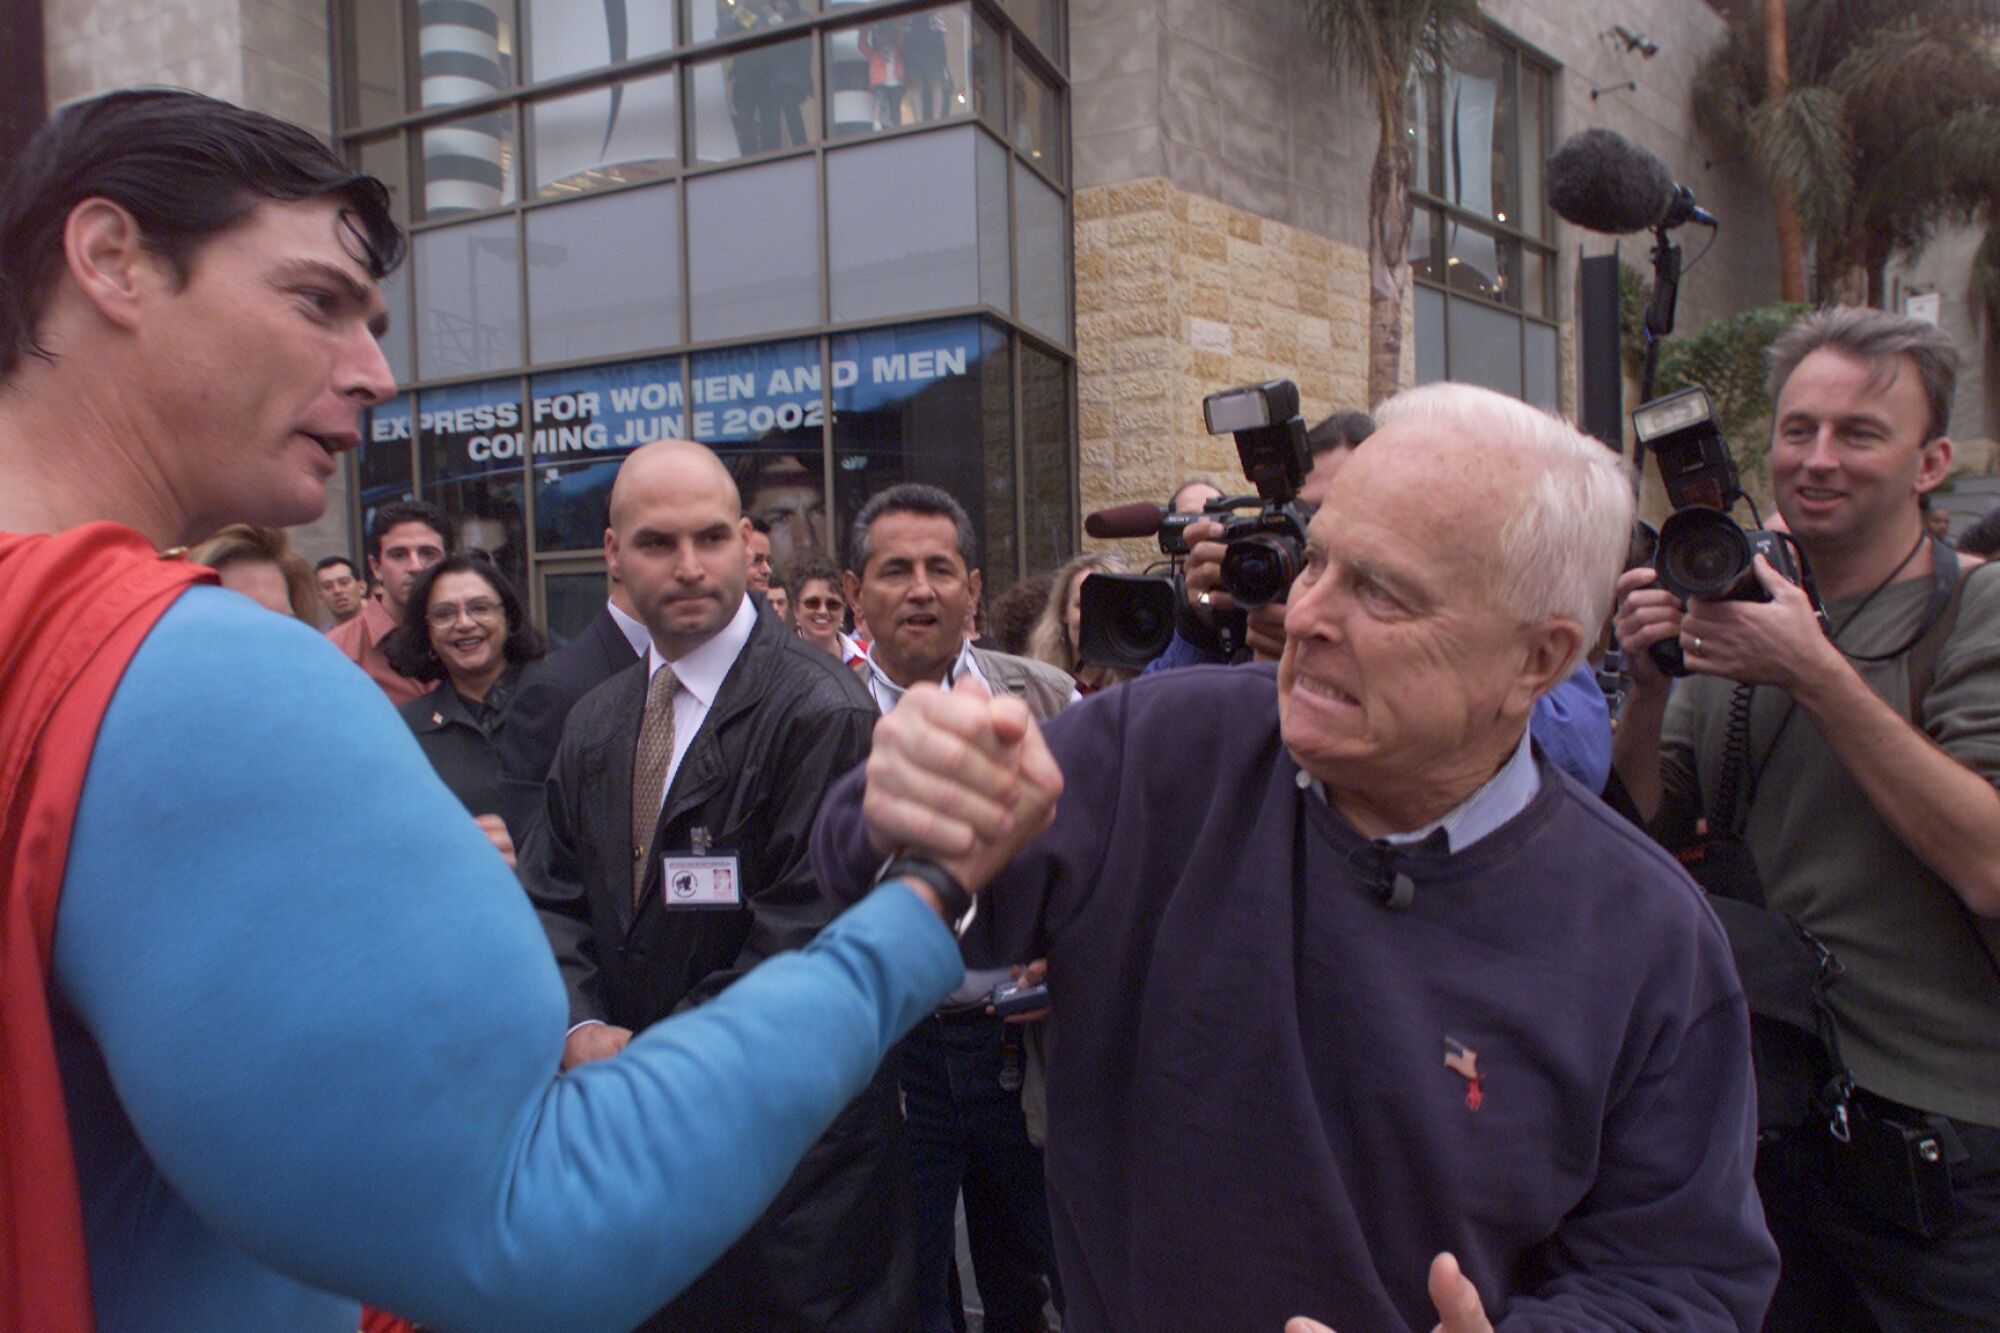 Governor candidate Richard Riordan pretends to wrestle with Christopher Dennis who looks like Superman